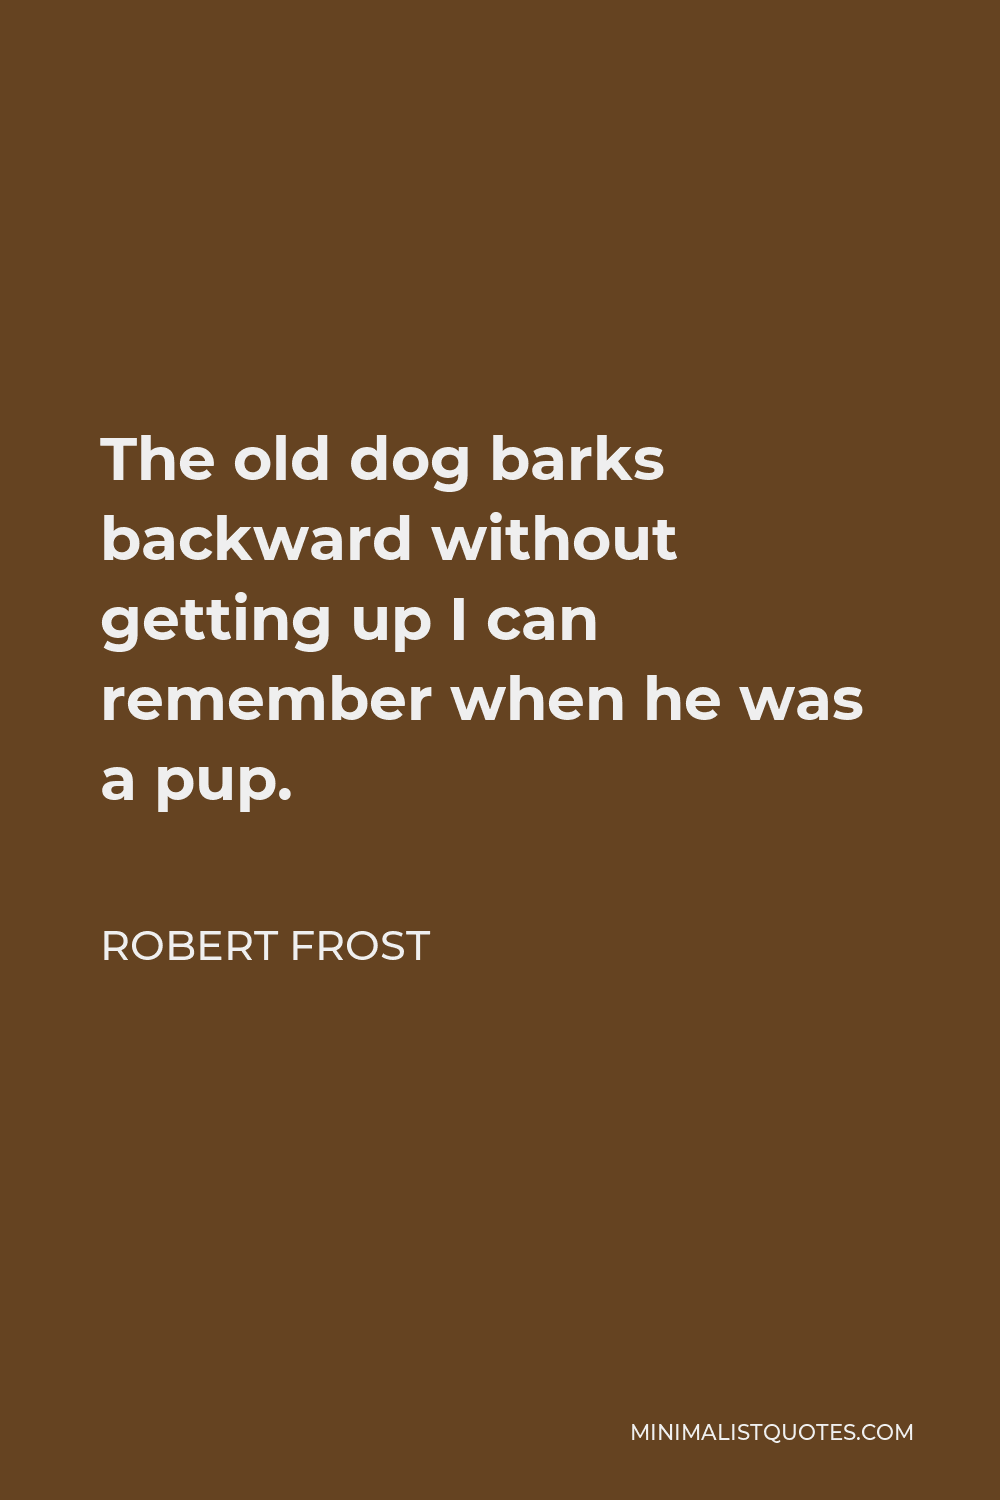 Robert Frost Quote - The old dog barks backward without getting up I can remember when he was a pup.